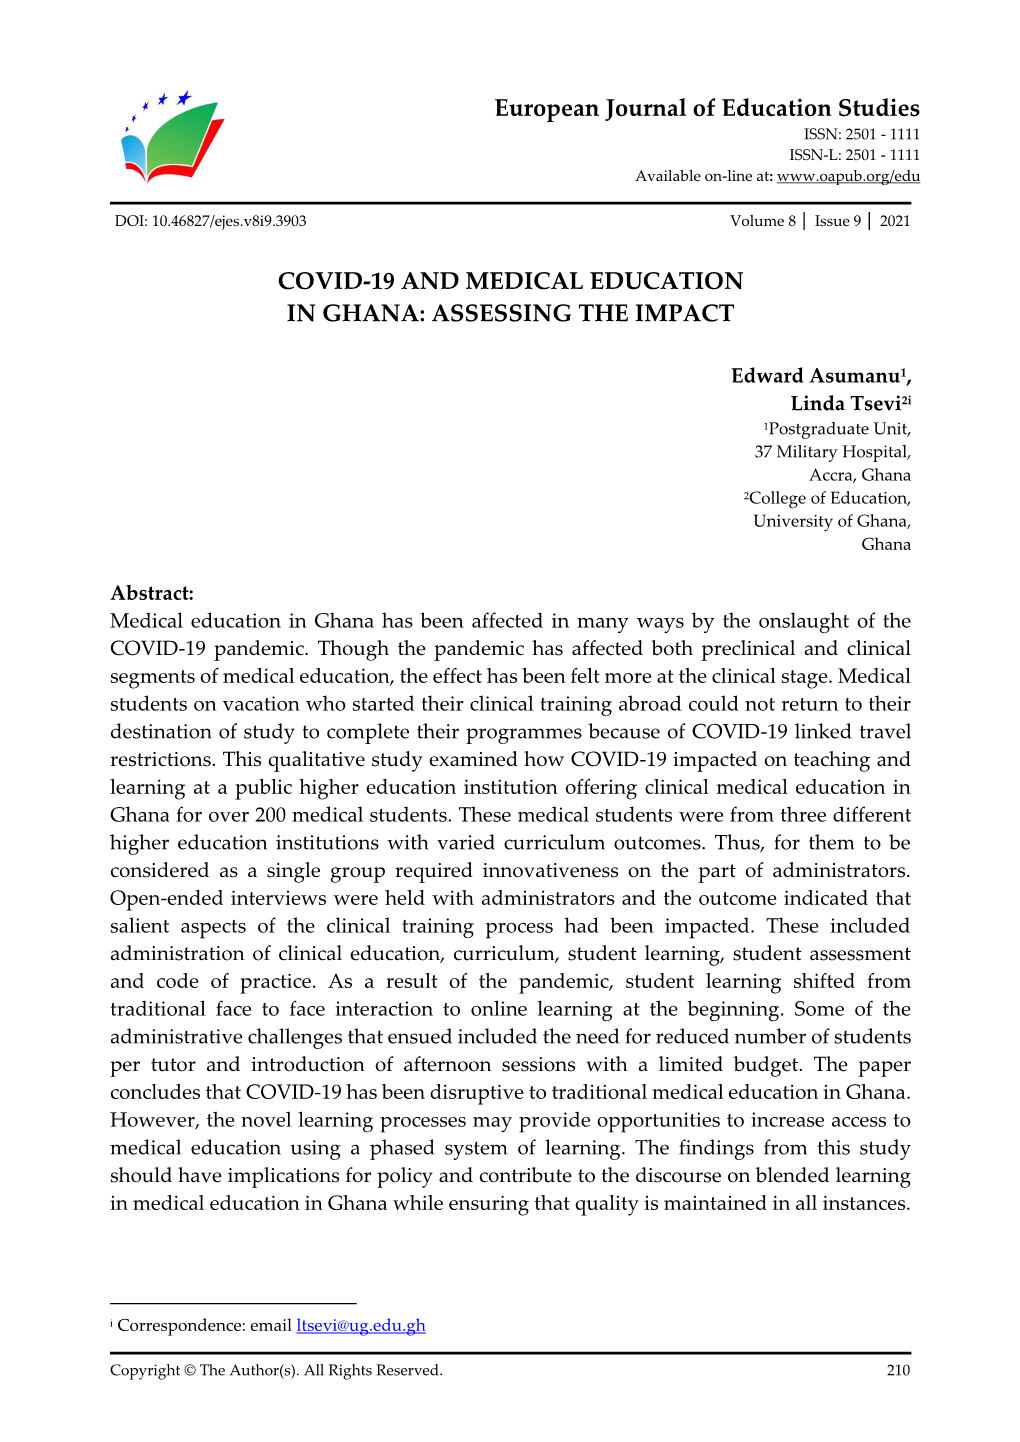 European Journal of Education Studies COVID-19 and MEDICAL